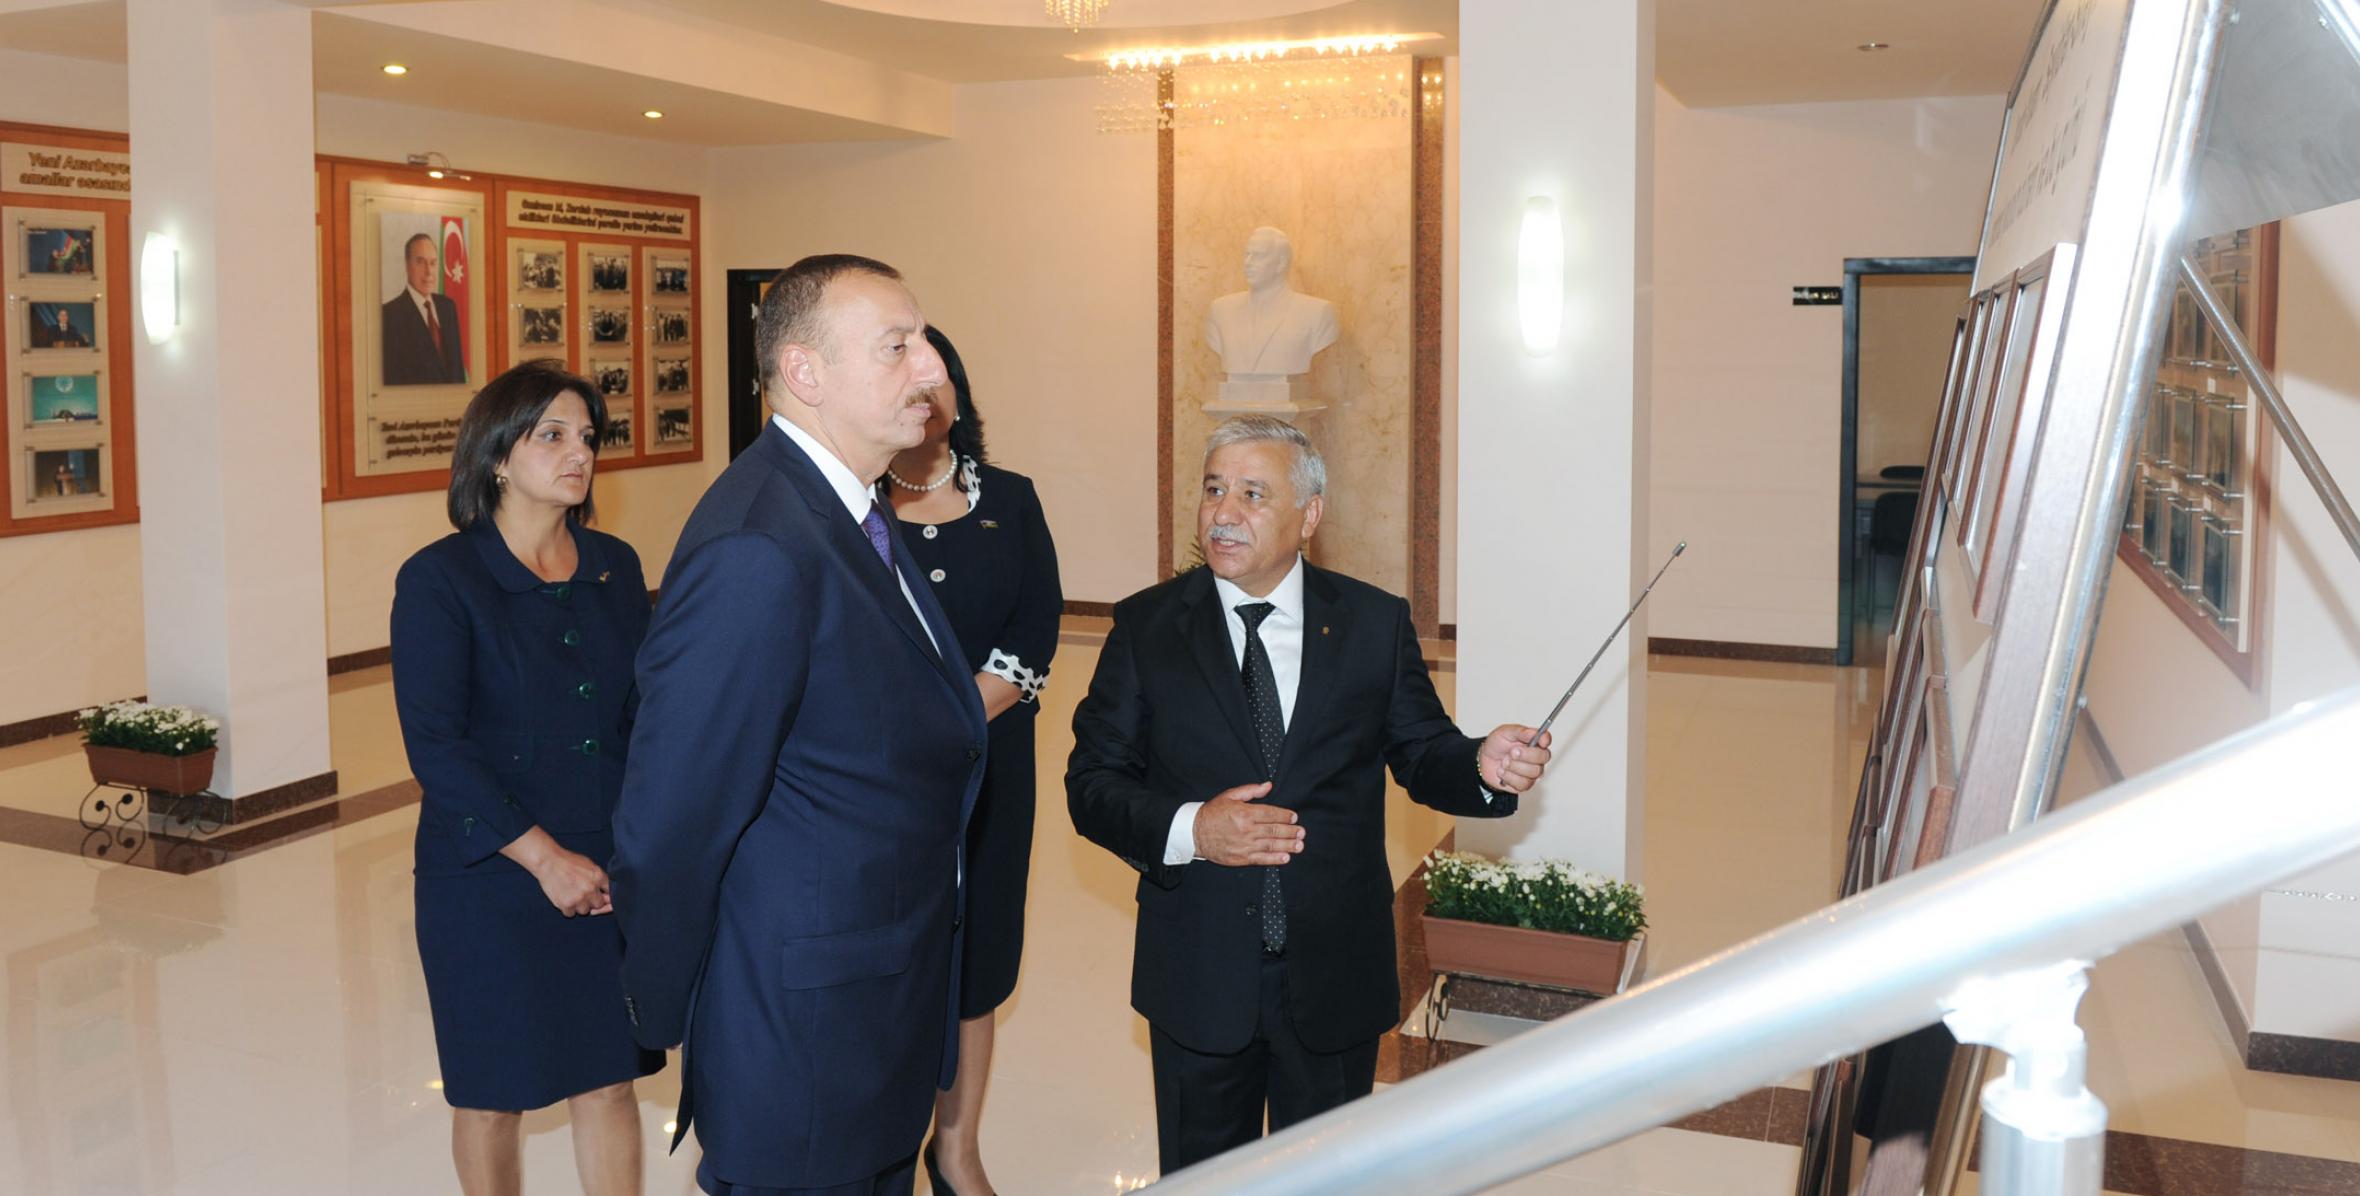 Ilham Aliyev attended the opening of a new building of the Zardab District branch of the “Yeni Azerbaijan Party”